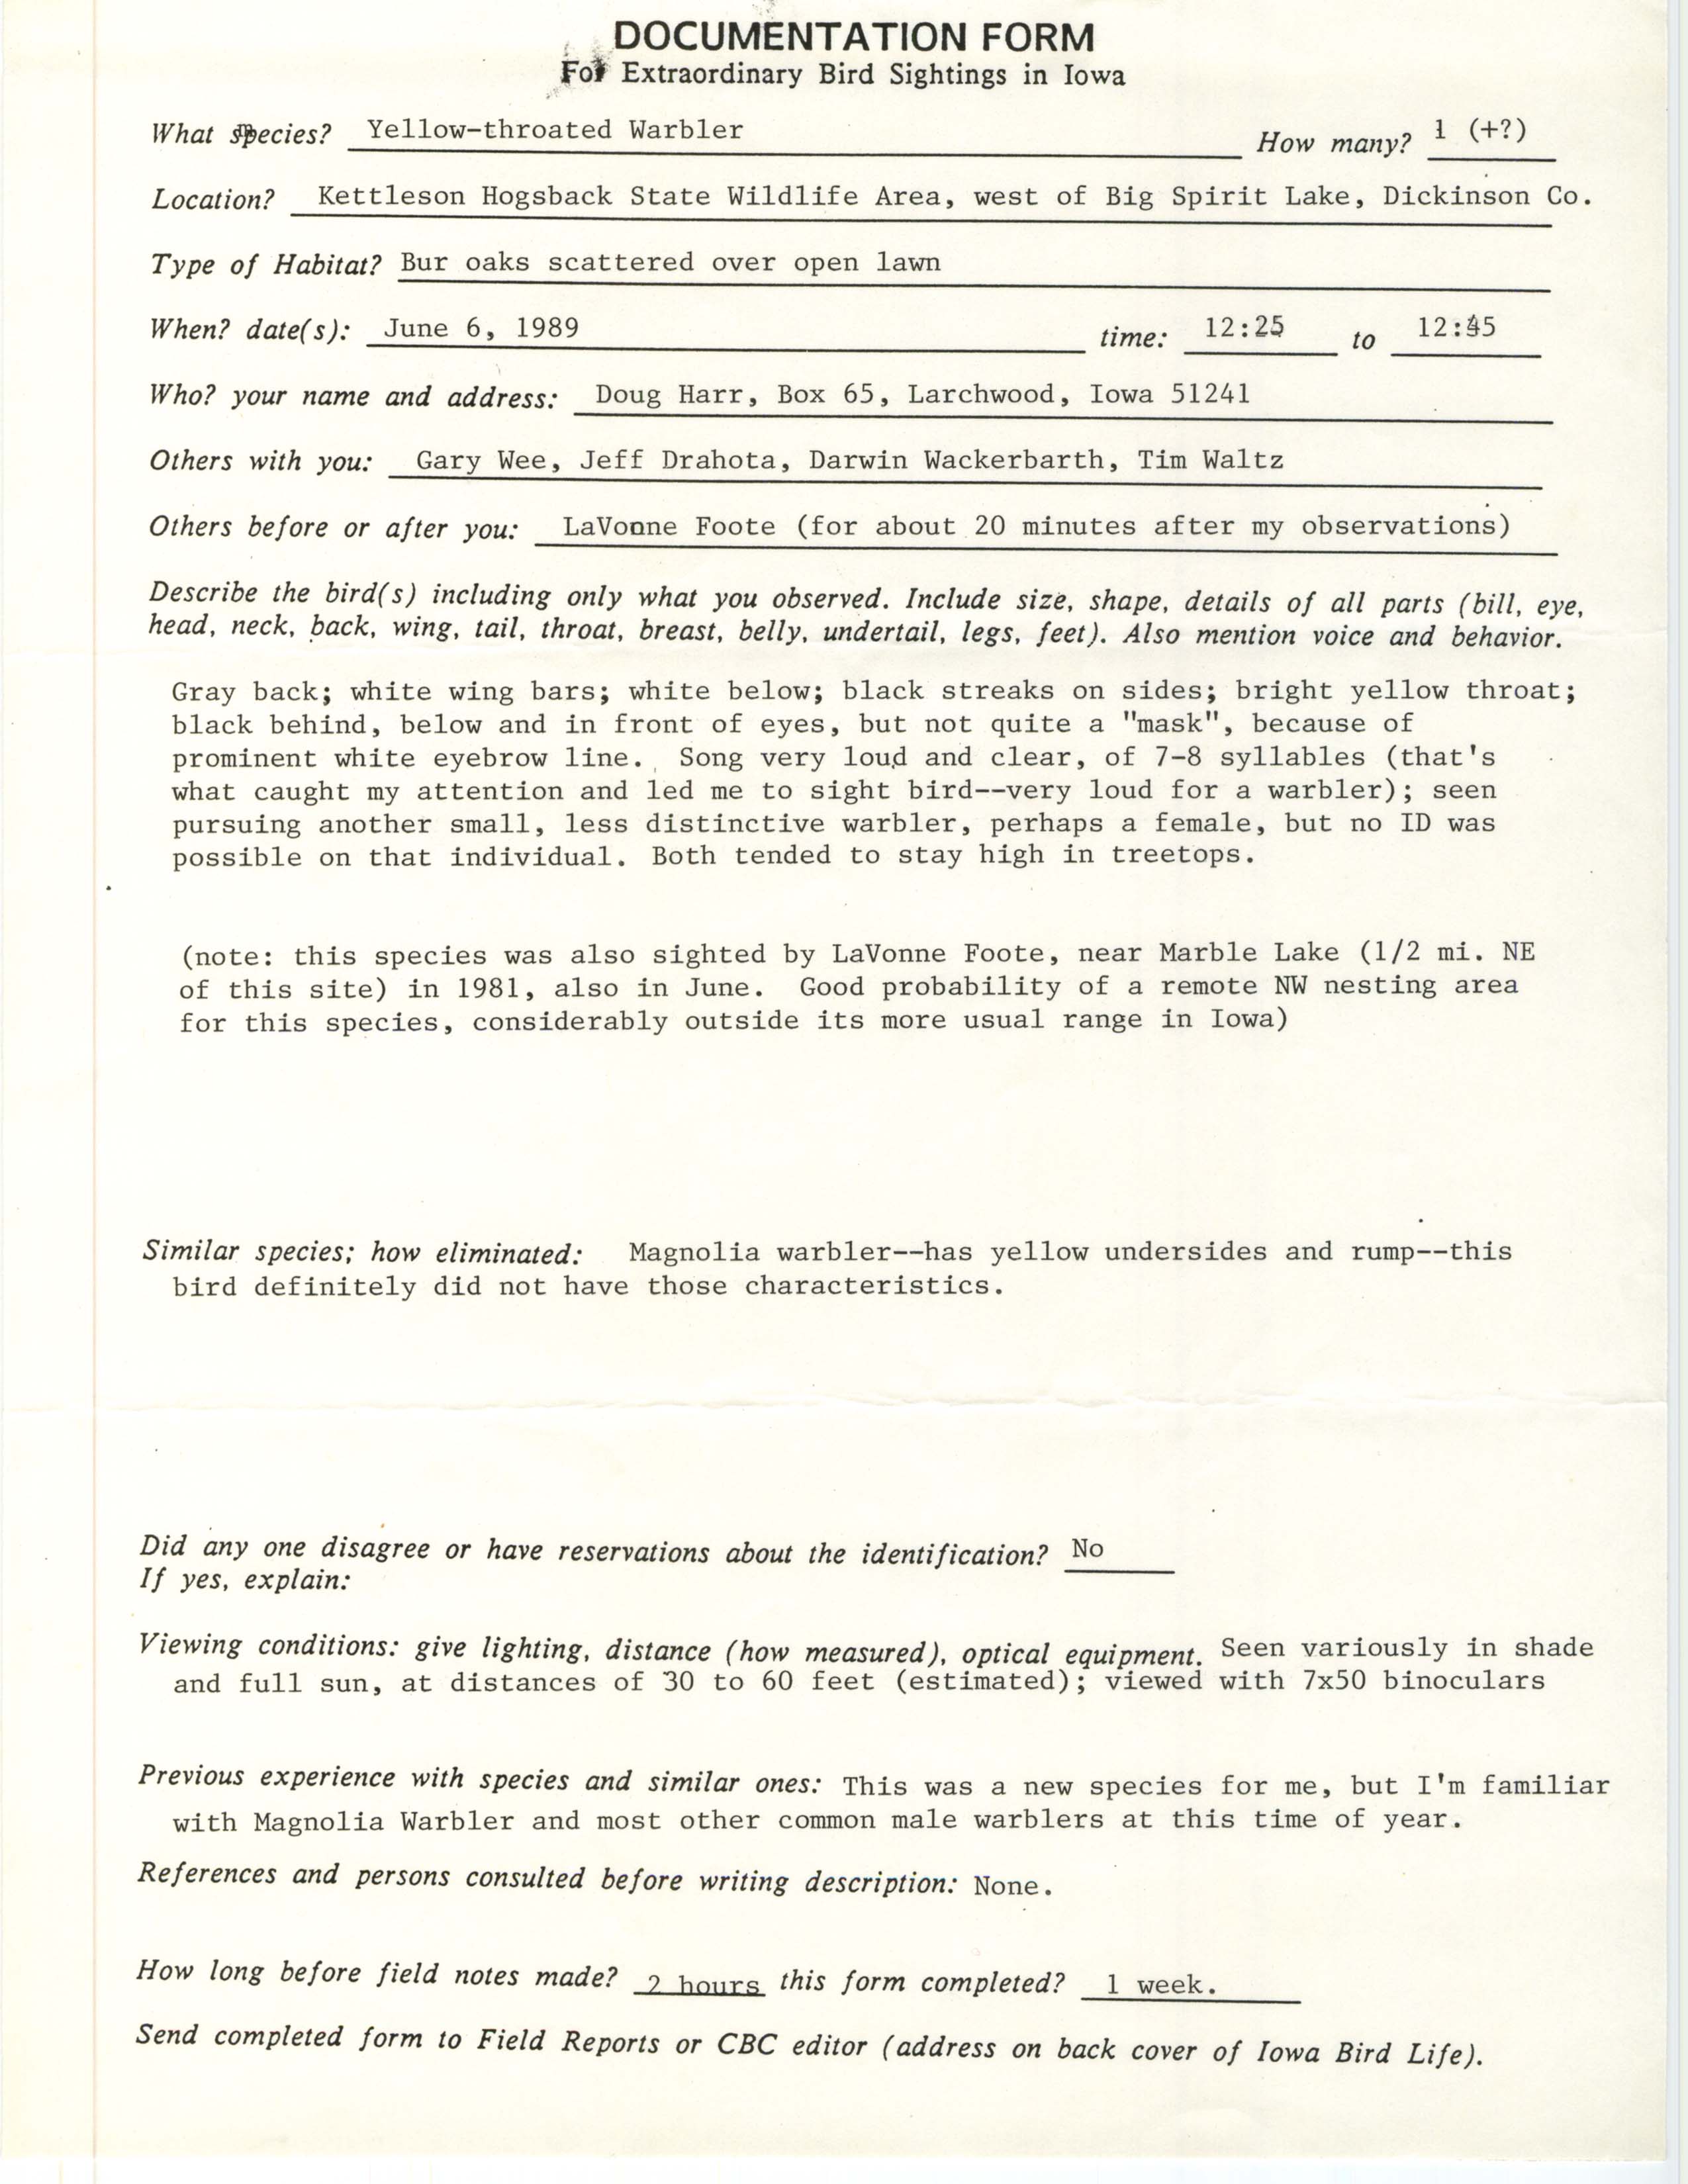 Rare bird documentation form for Yellow-throated Warbler at Kettleson Hogsback State Wildlife Area in Dickinson County, IA on June 6, 1989